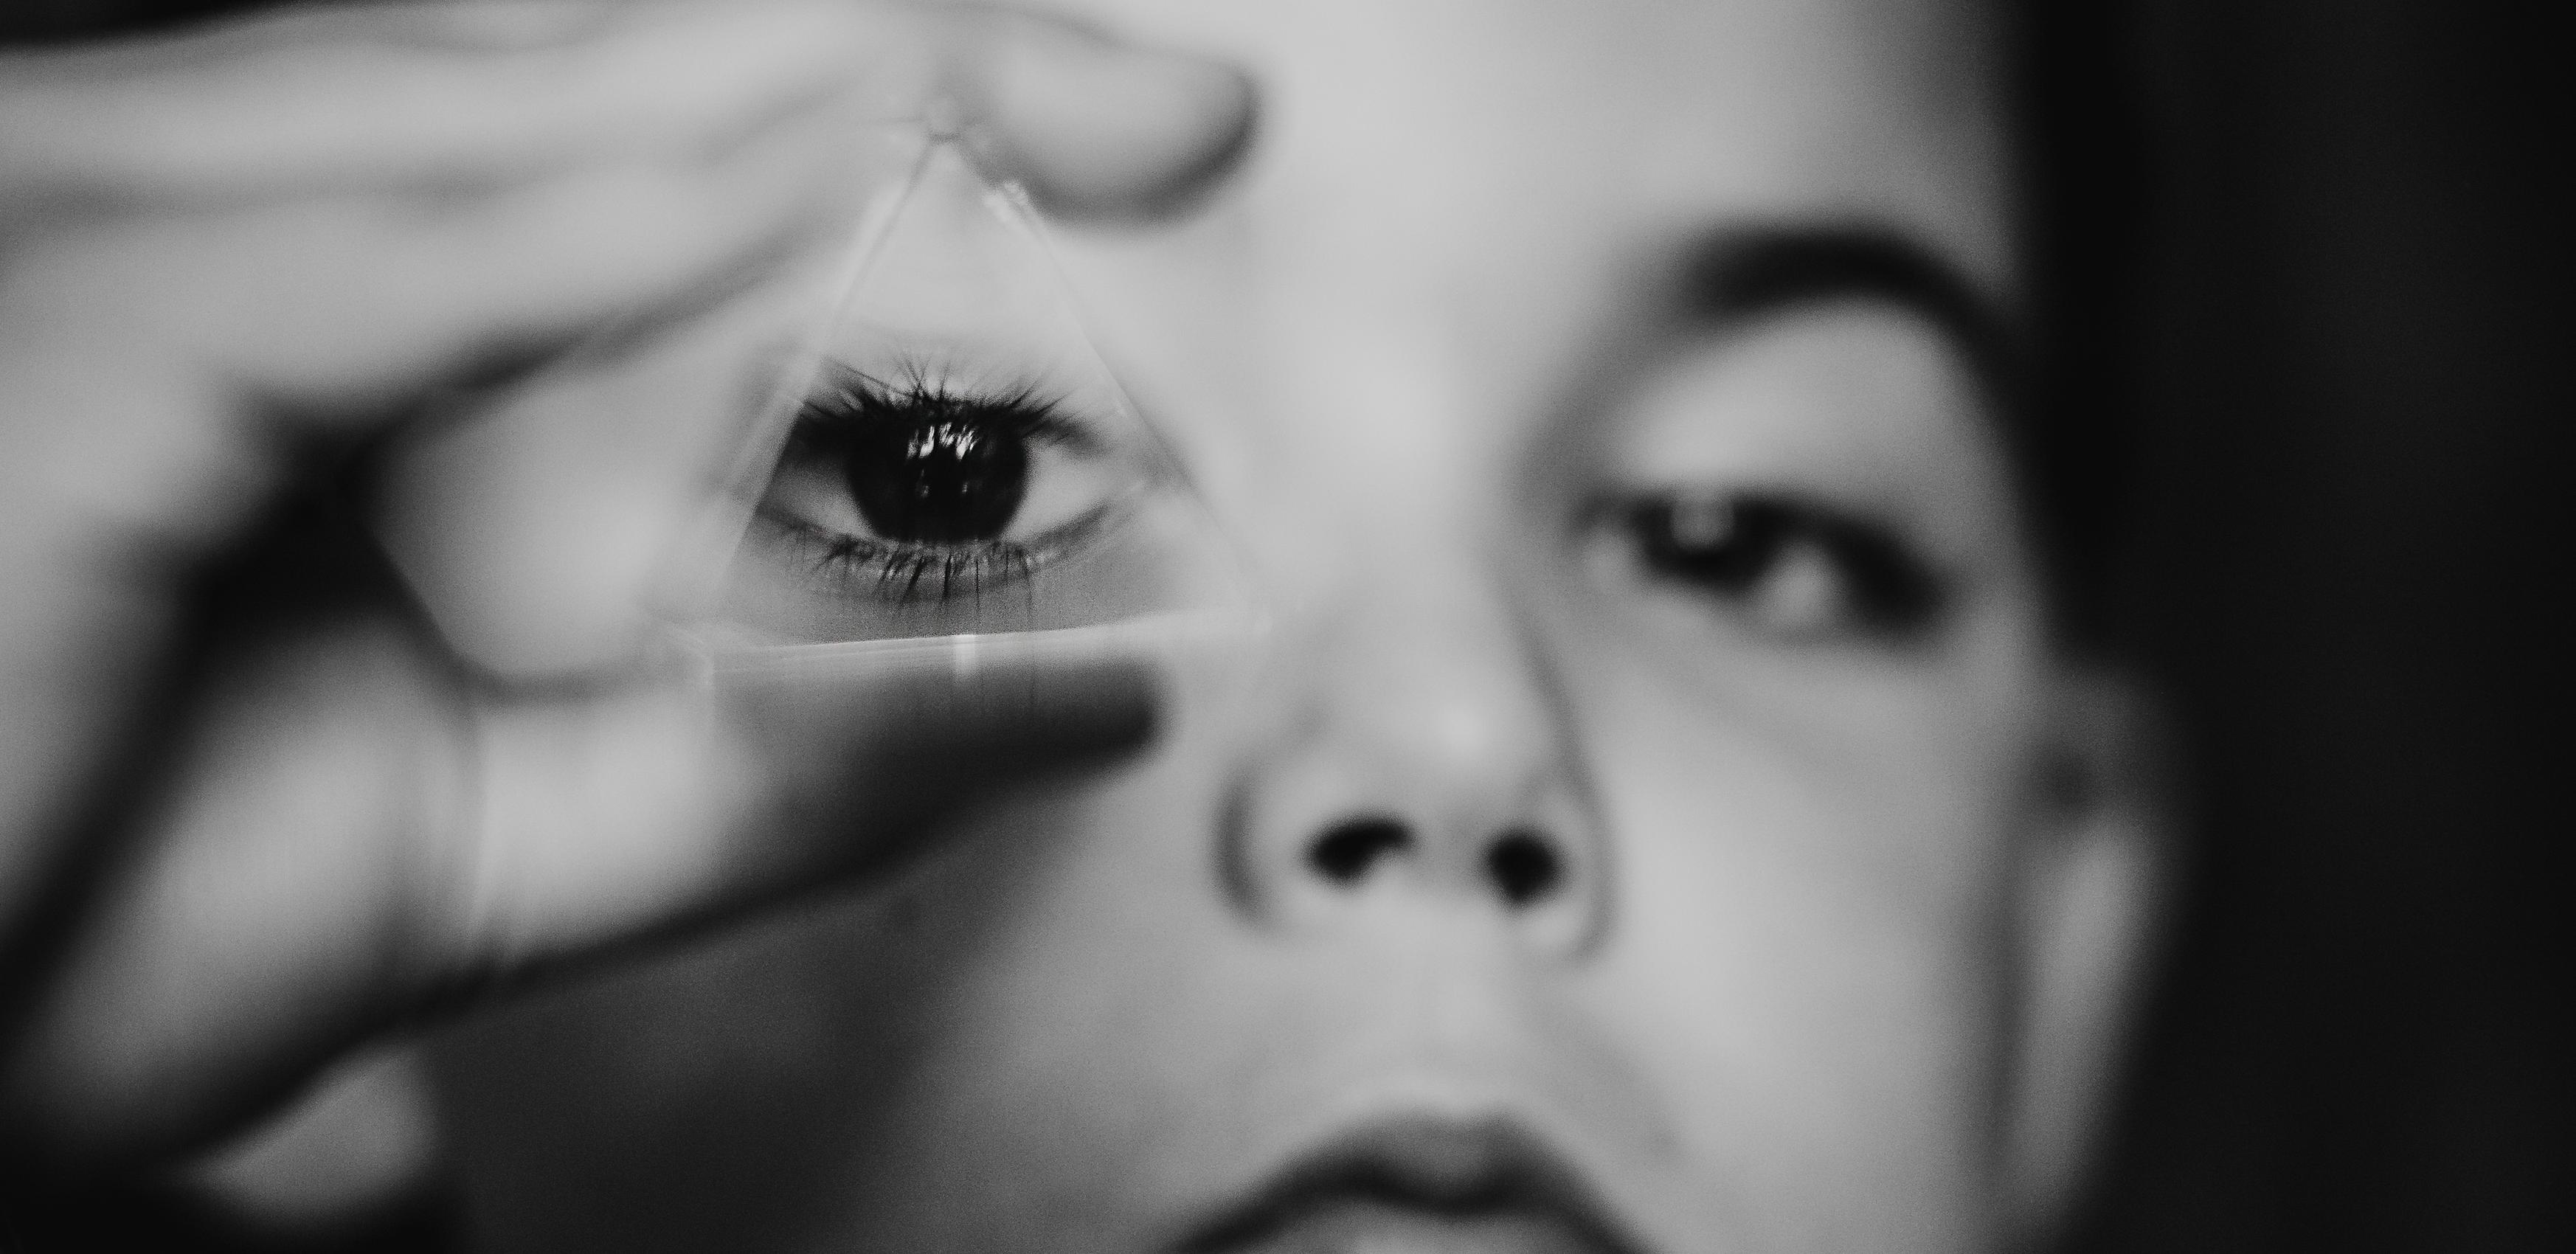 Boy looking through glass prism with one eye.